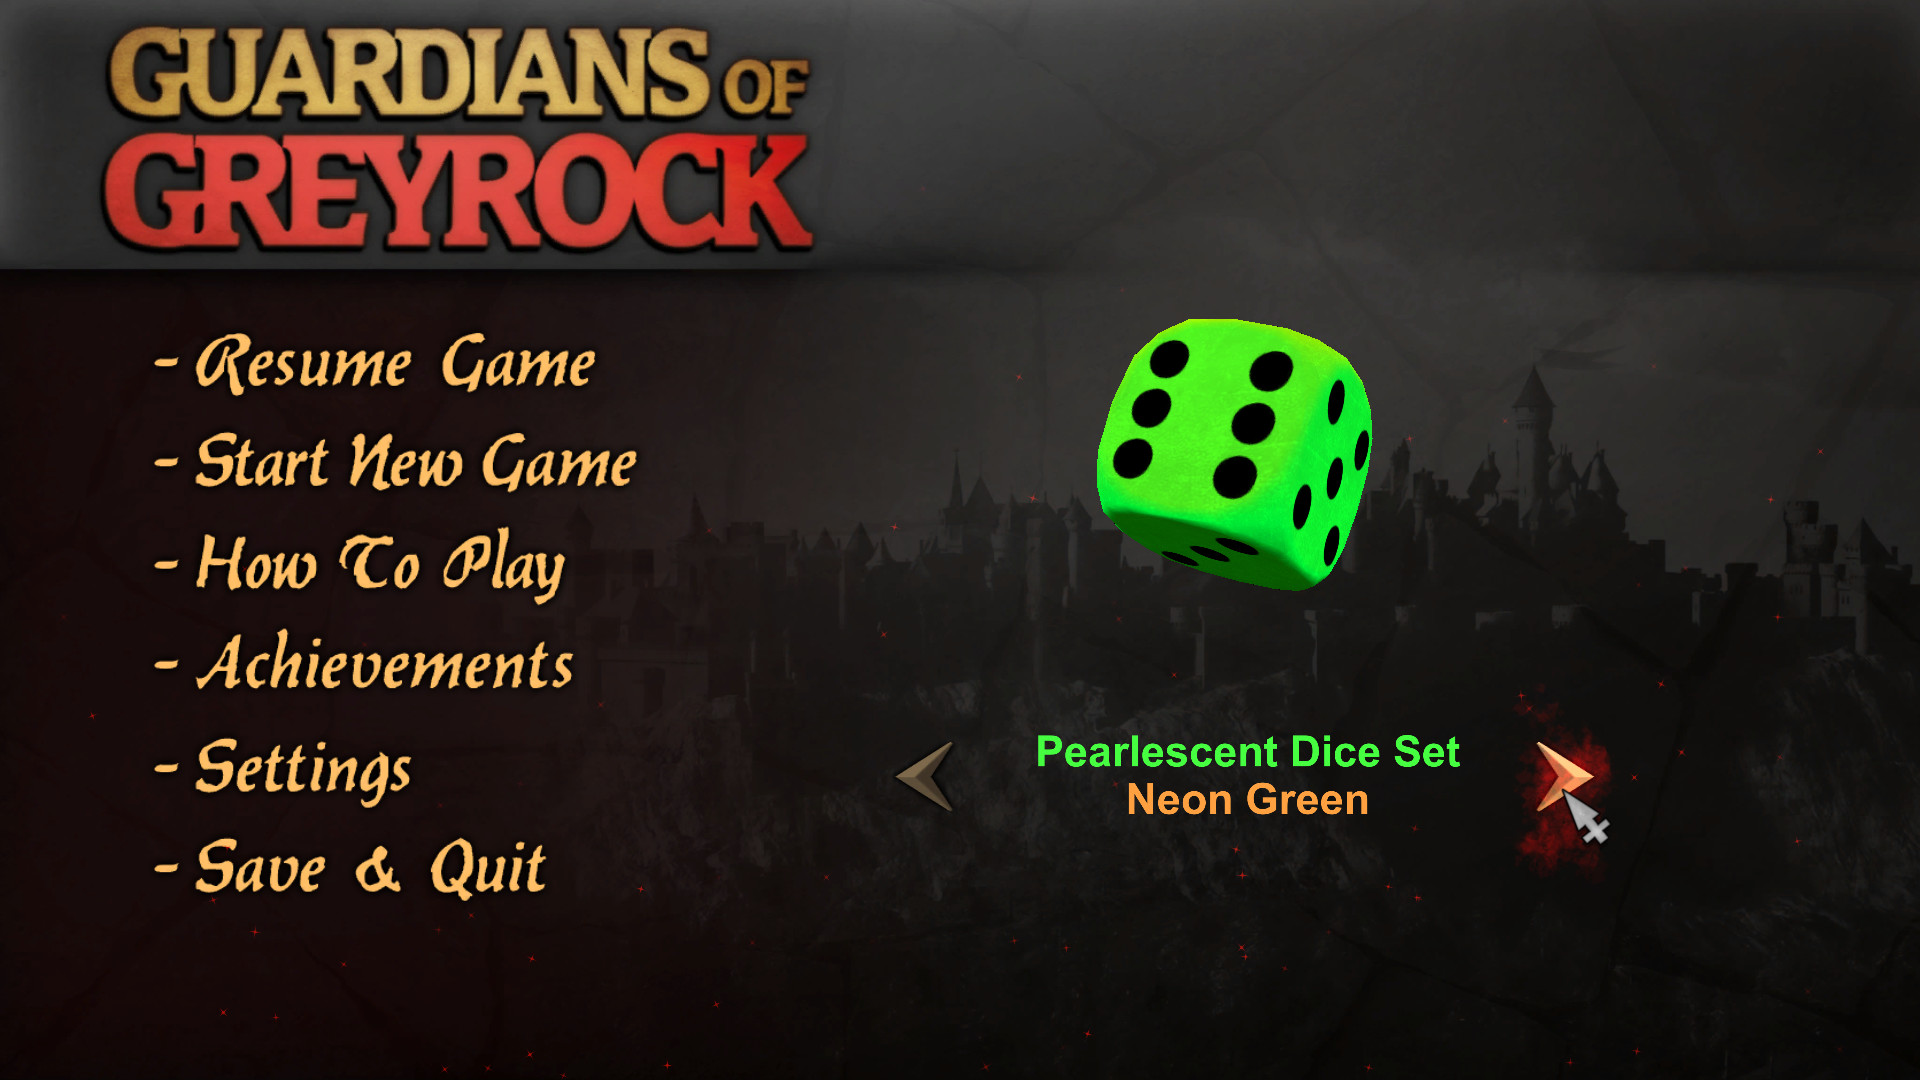 Guardians of Greyrock - Dice Pack: Pearlescent Set Featured Screenshot #1